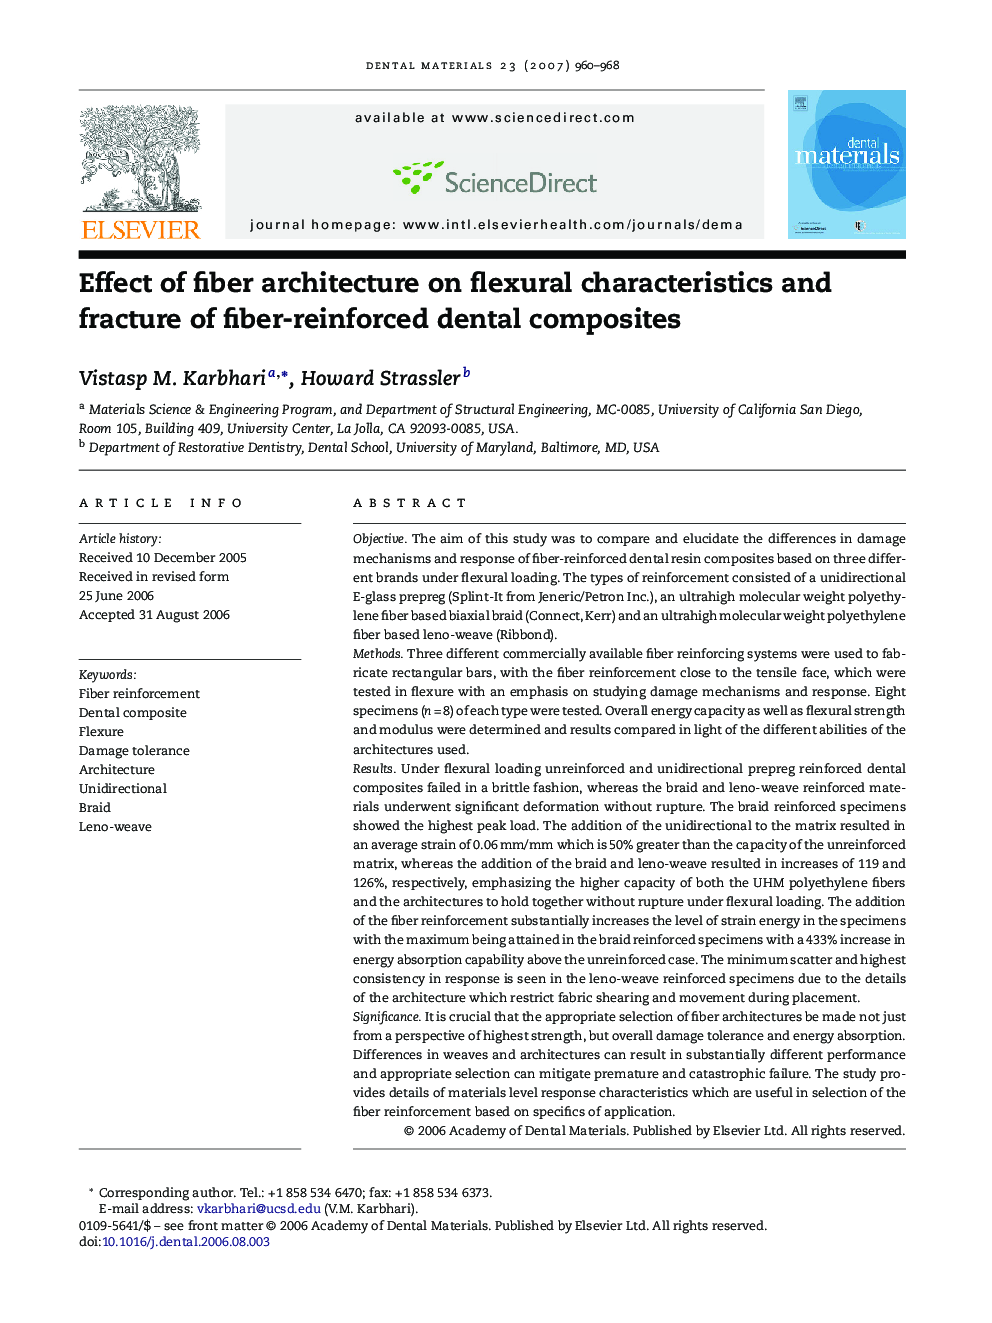 Effect of fiber architecture on flexural characteristics and fracture of fiber-reinforced dental composites